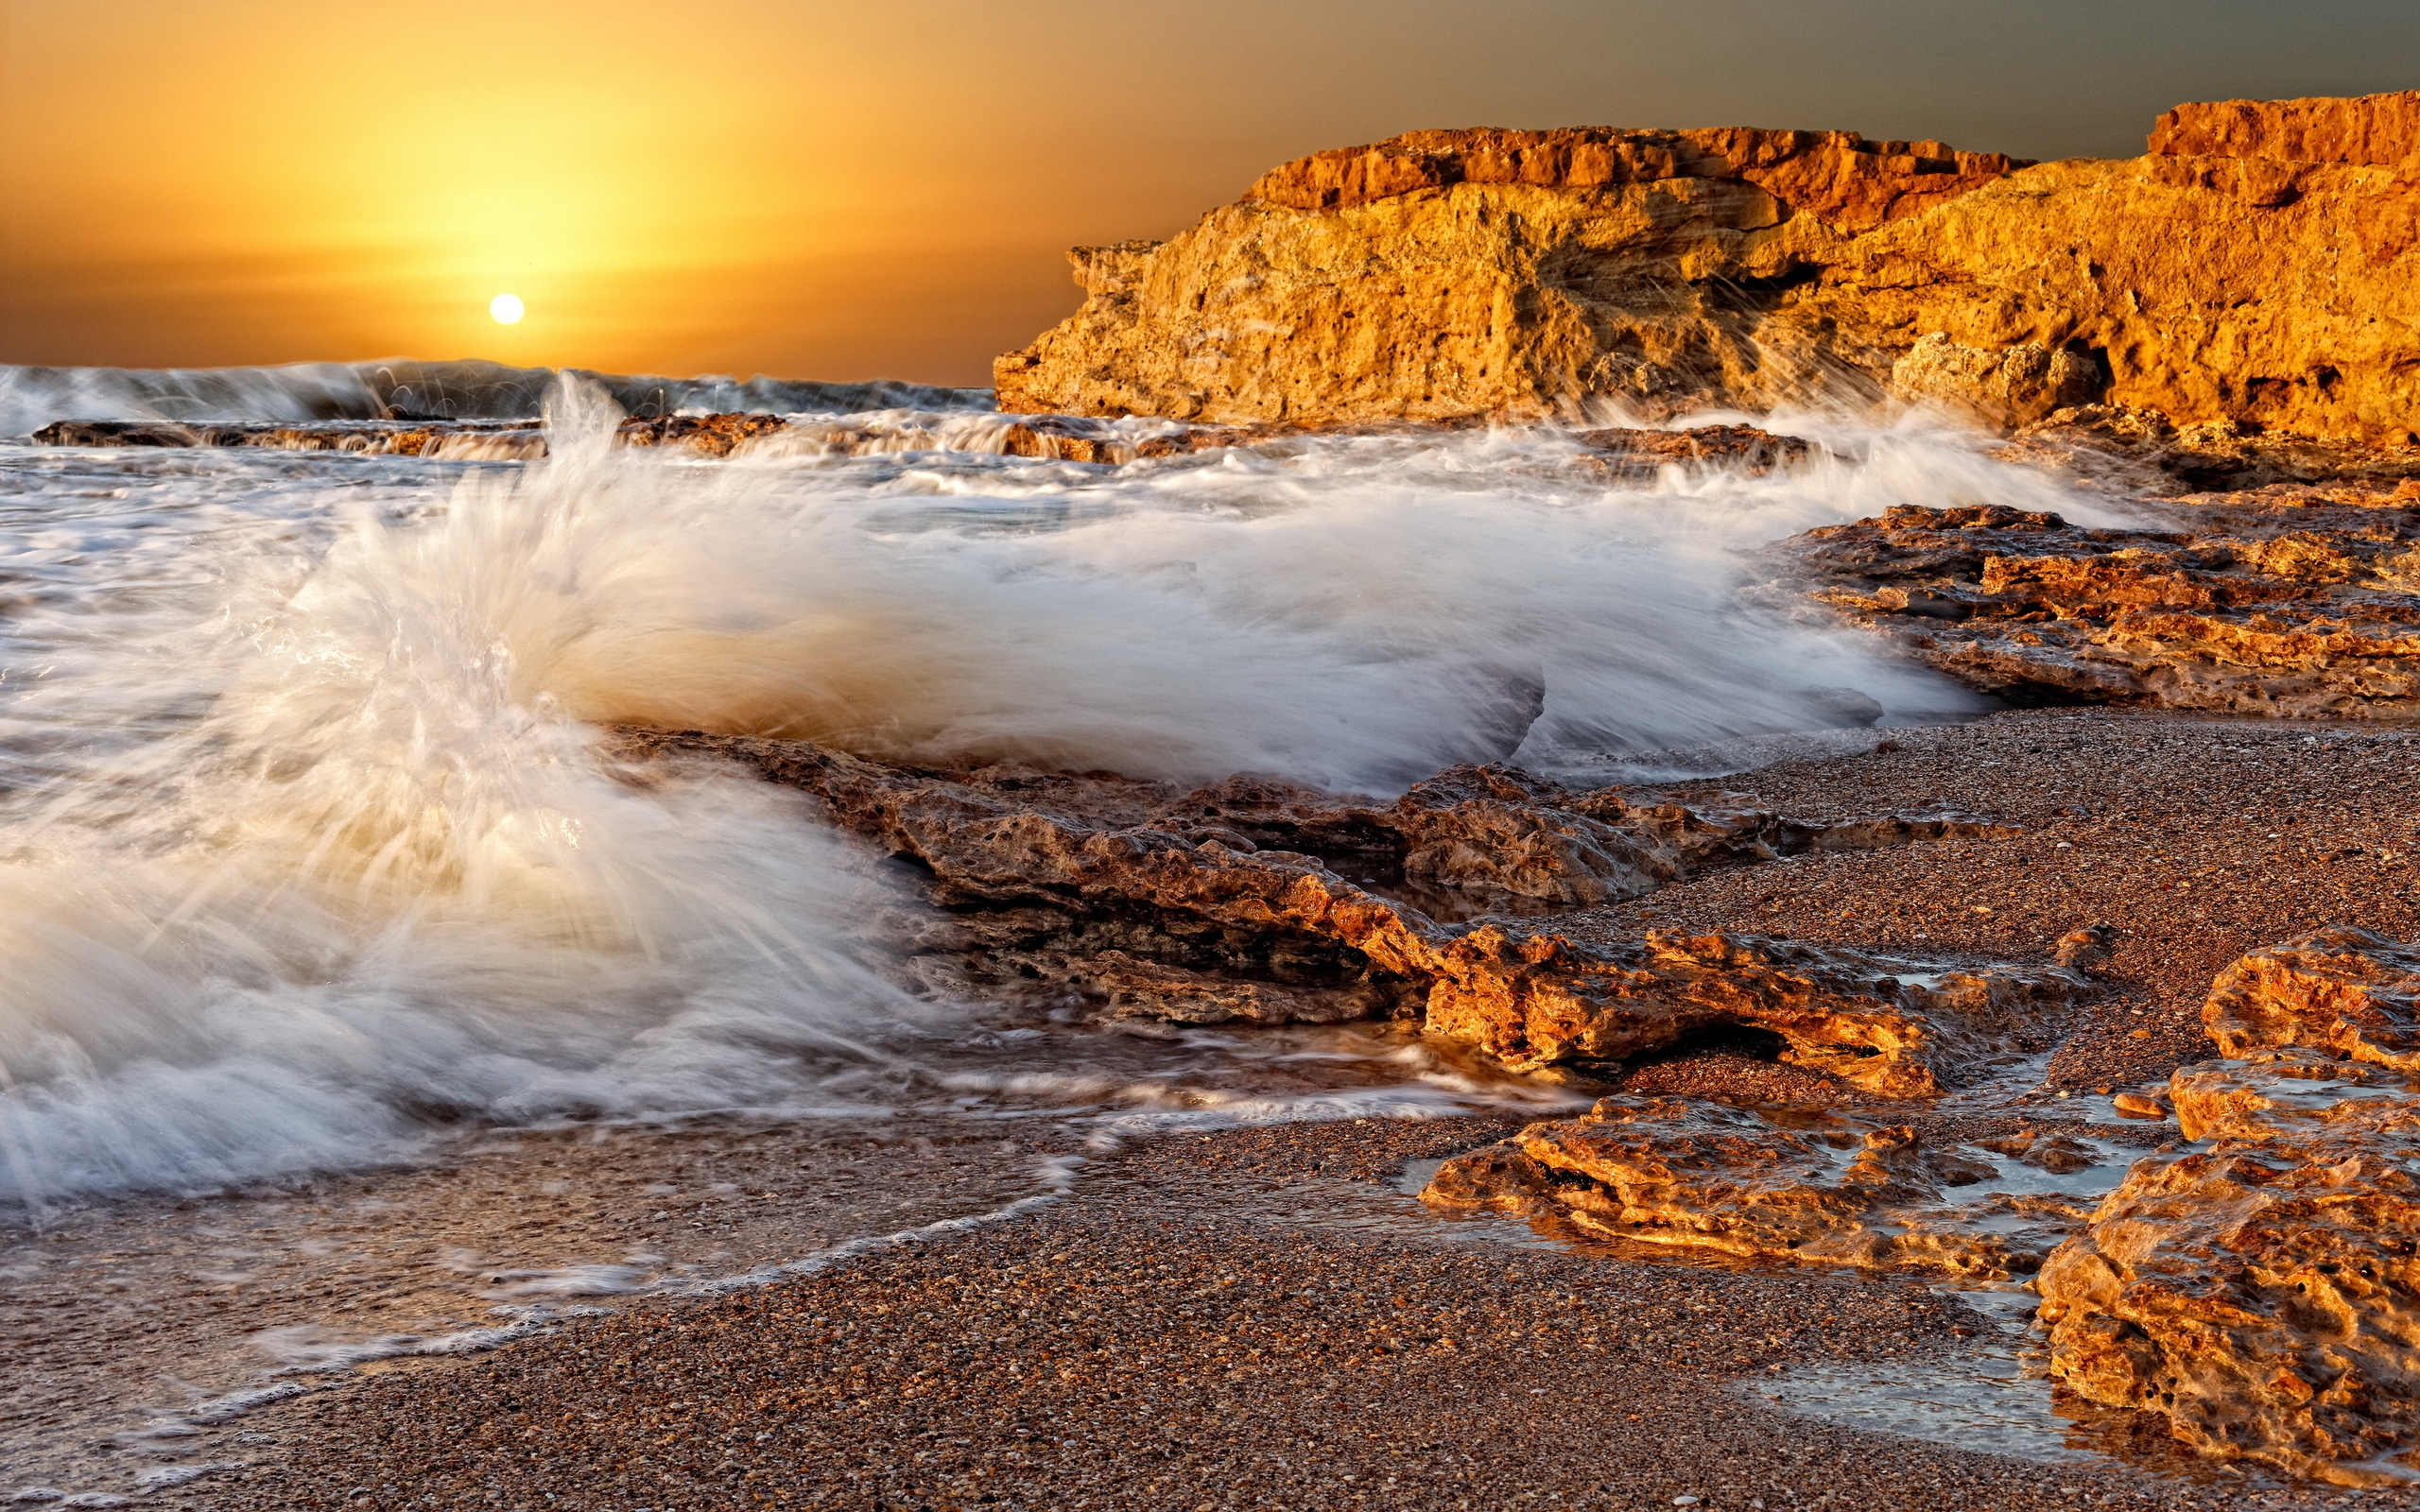 Strong waves on the beach at sunset